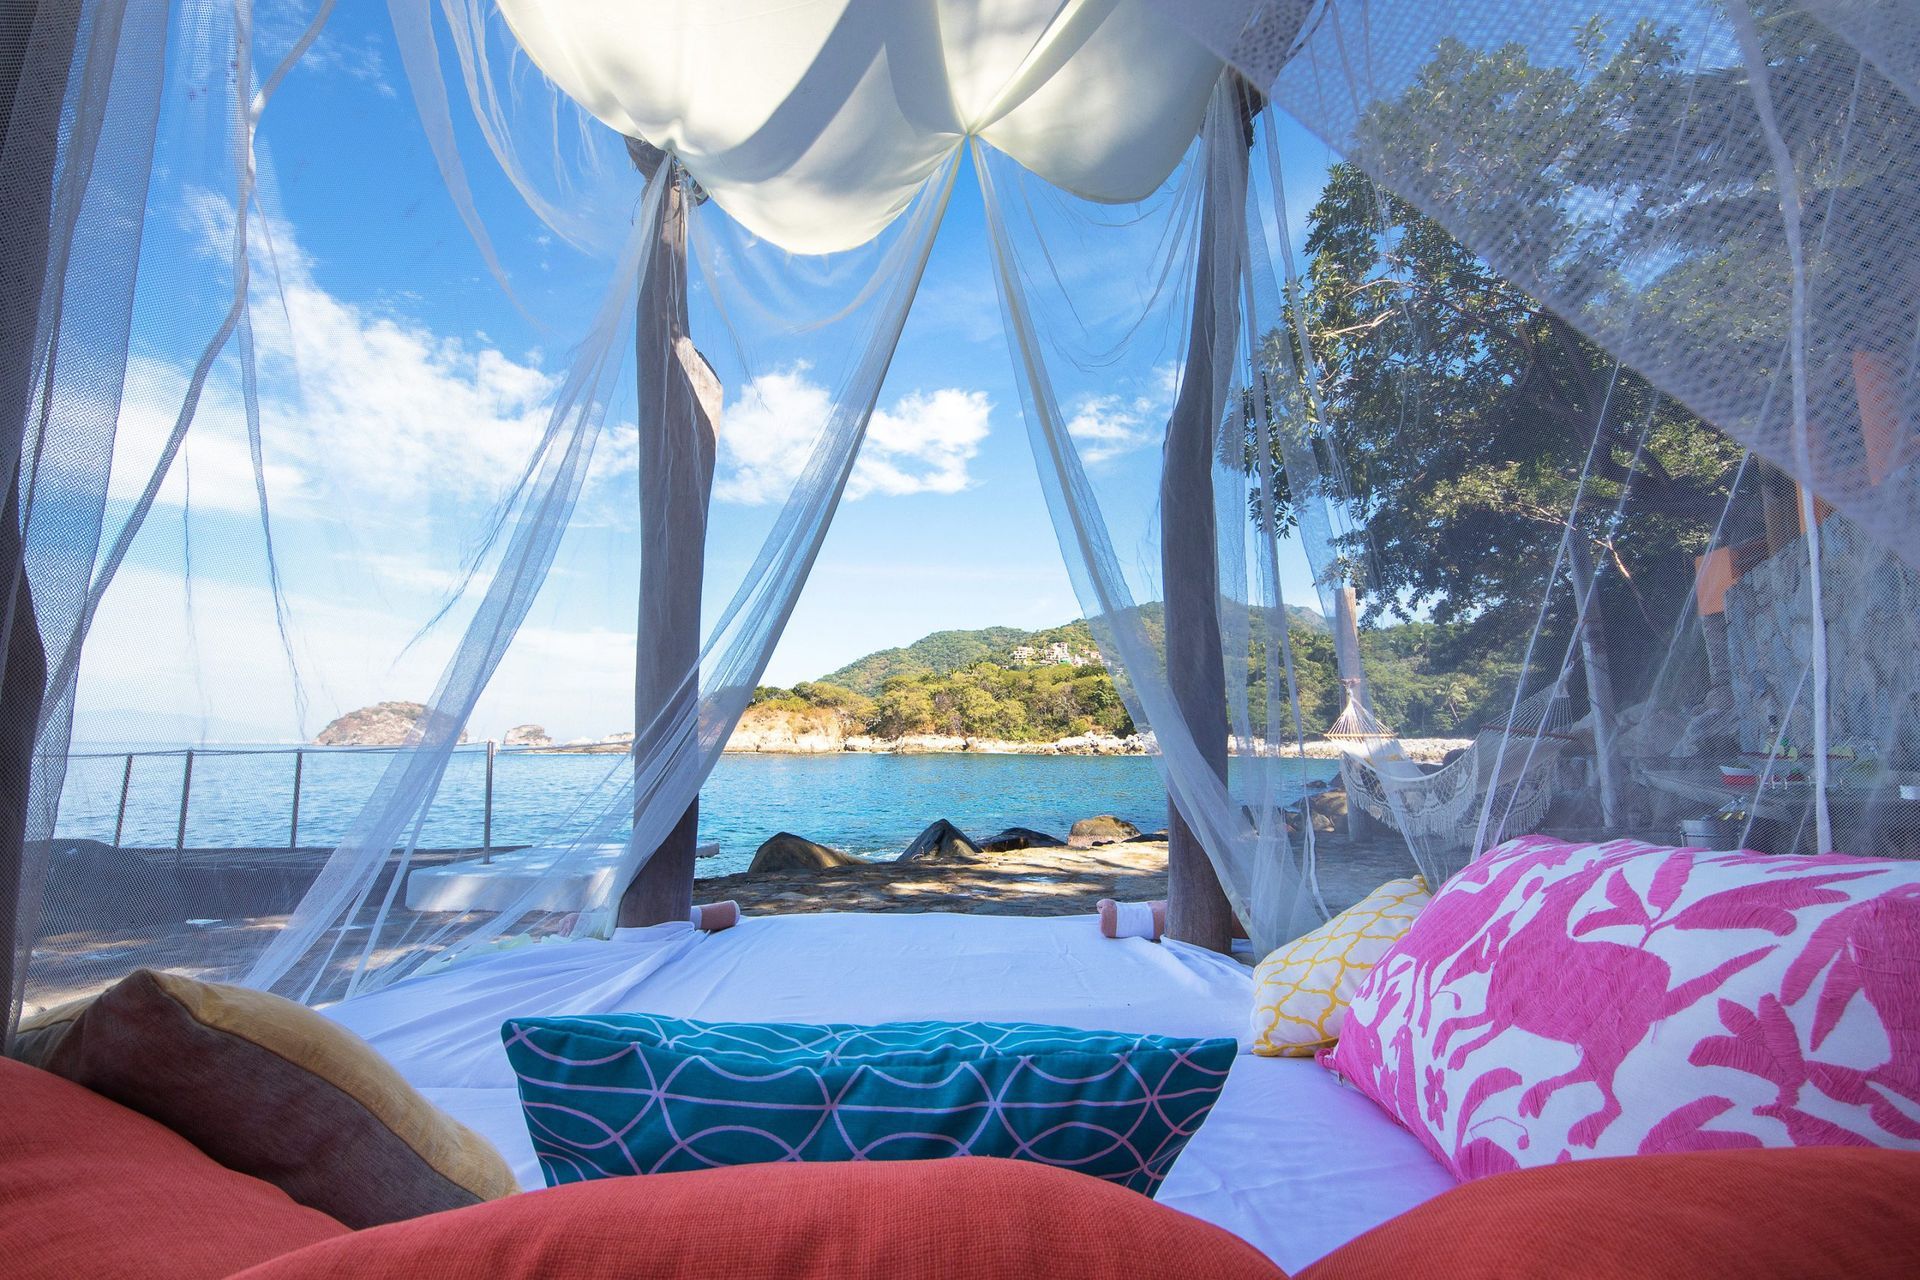 a bed with a canopy over it looking out over the ocean